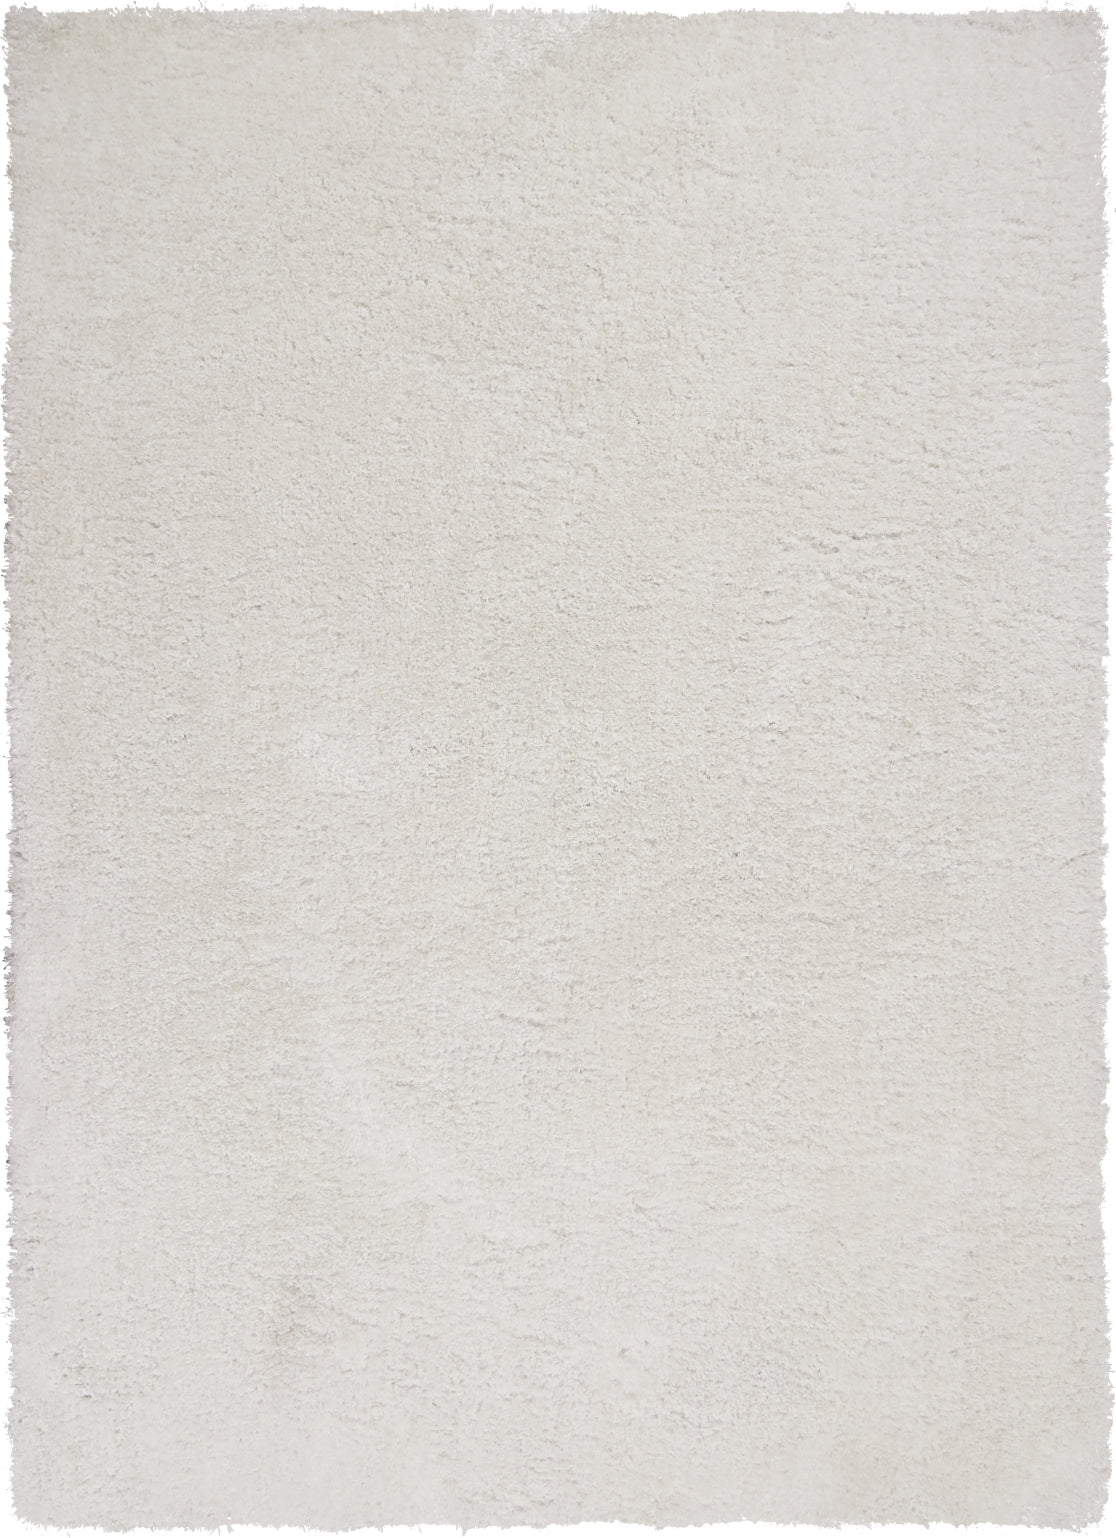 KAS Luxe 1903 Winter White Area Rug main image